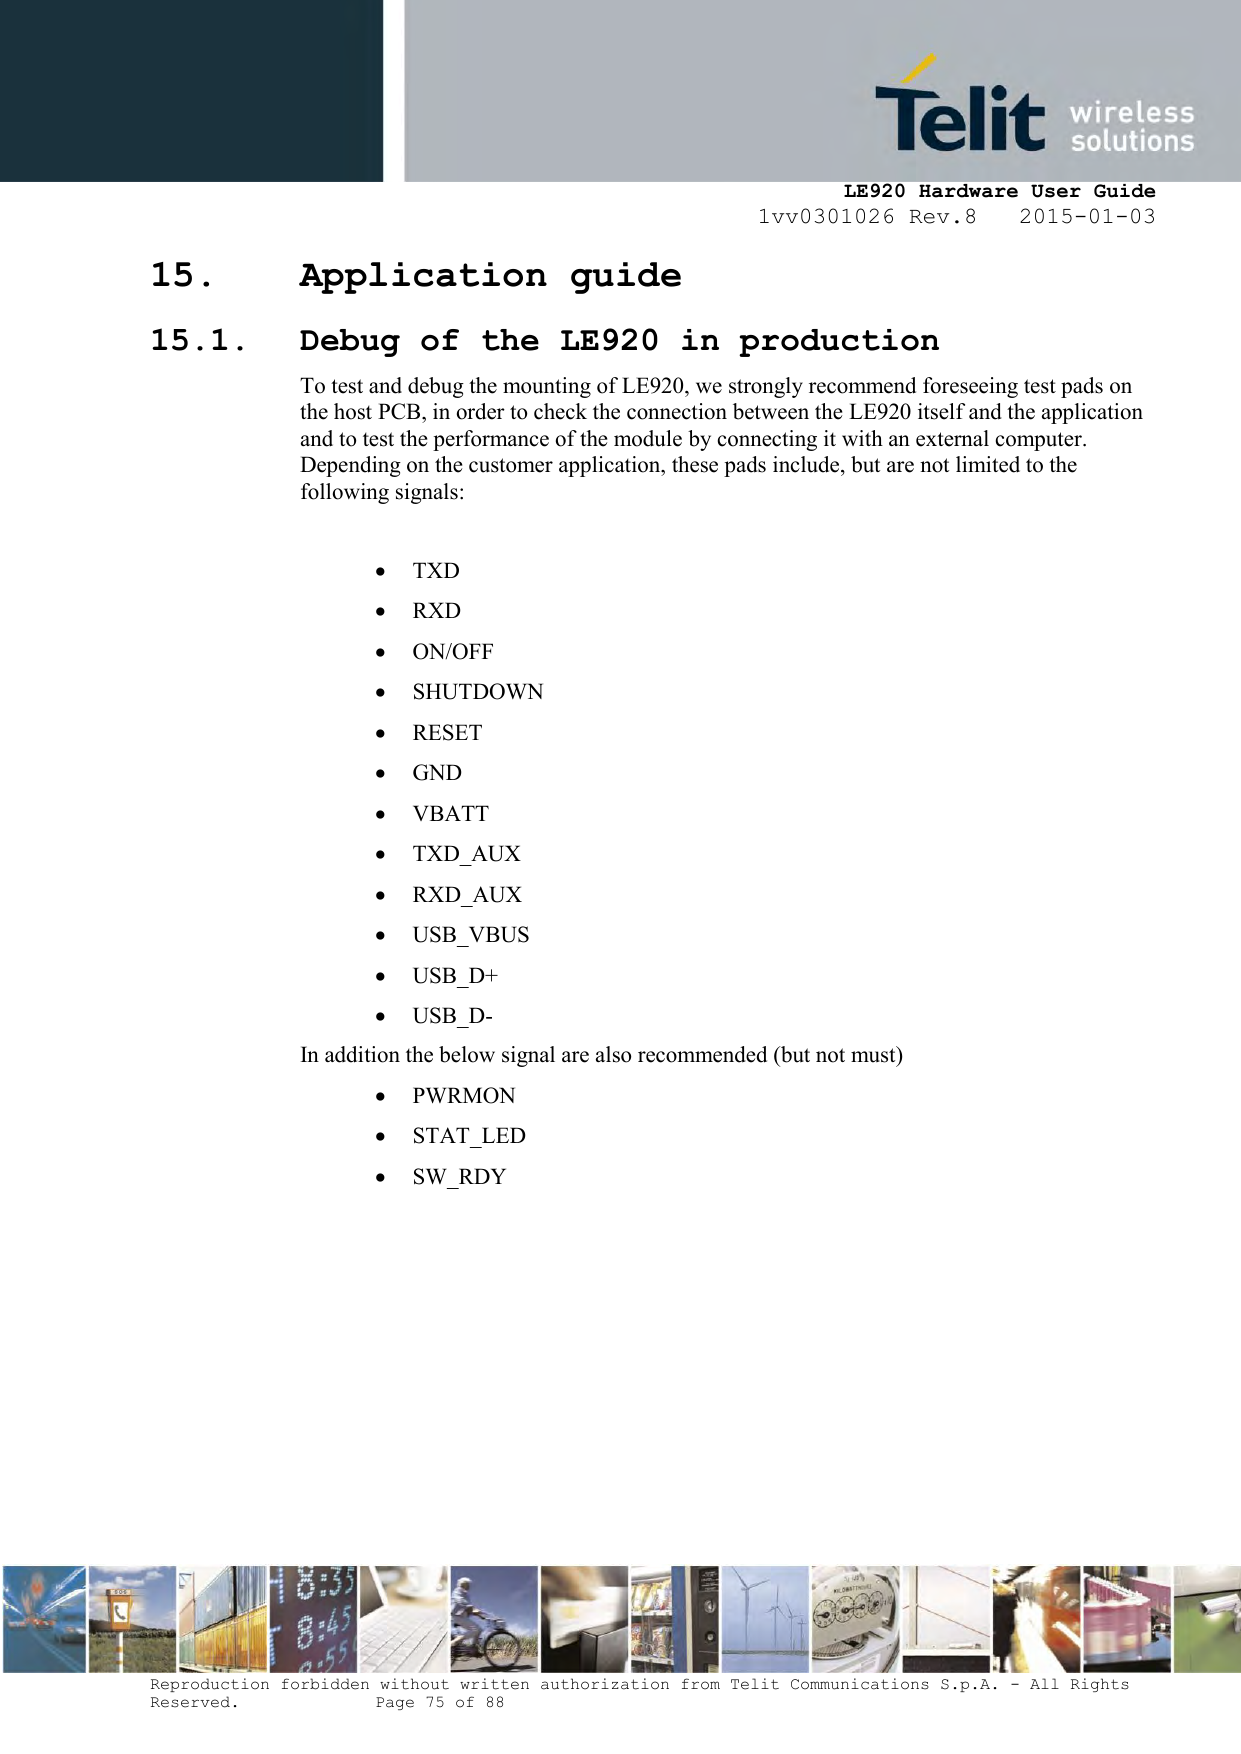     LE920 Hardware User Guide 1vv0301026 Rev.8   2015-01-03 Reproduction forbidden without written authorization from Telit Communications S.p.A. - All Rights Reserved.    Page 75 of 88  15. Application guide 15.1. Debug of the LE920 in production To test and debug the mounting of LE920, we strongly recommend foreseeing test pads on the host PCB, in order to check the connection between the LE920 itself and the application and to test the performance of the module by connecting it with an external computer. Depending on the customer application, these pads include, but are not limited to the following signals:   TXD  RXD  ON/OFF  SHUTDOWN  RESET  GND  VBATT  TXD_AUX   RXD_AUX   USB_VBUS  USB_D+  USB_D- In addition the below signal are also recommended (but not must)   PWRMON   STAT_LED  SW_RDY   